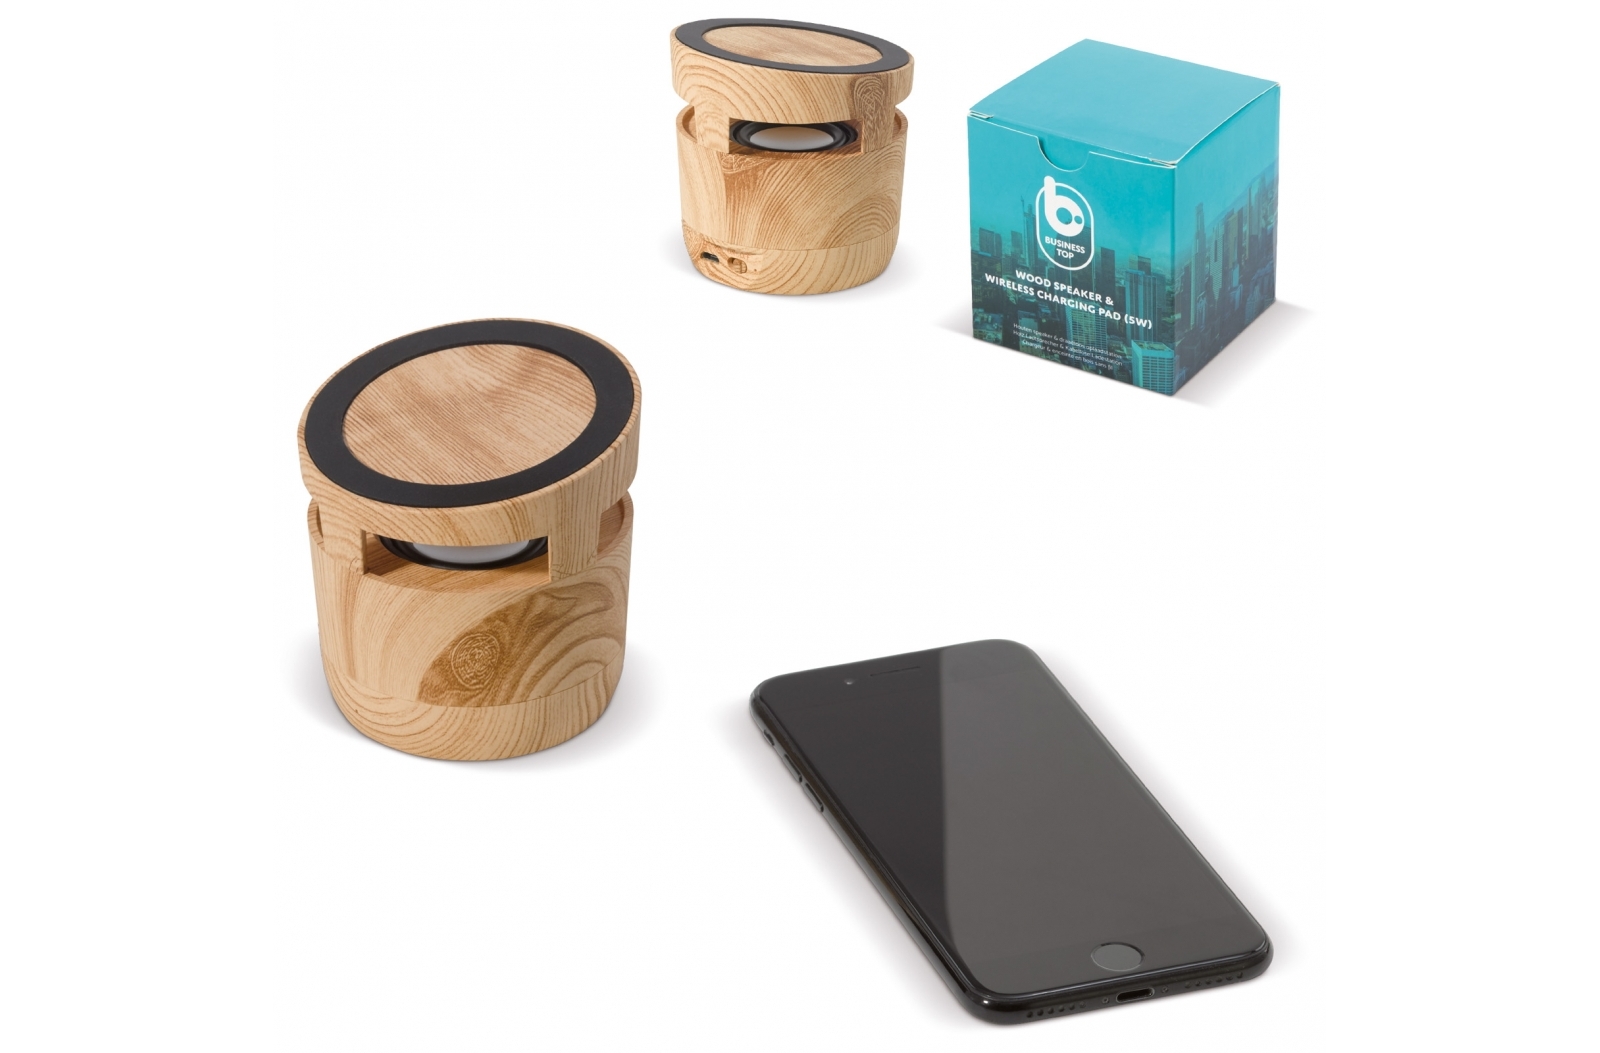 Luxurious Wooden Wireless Speaker and Charger - Warwick